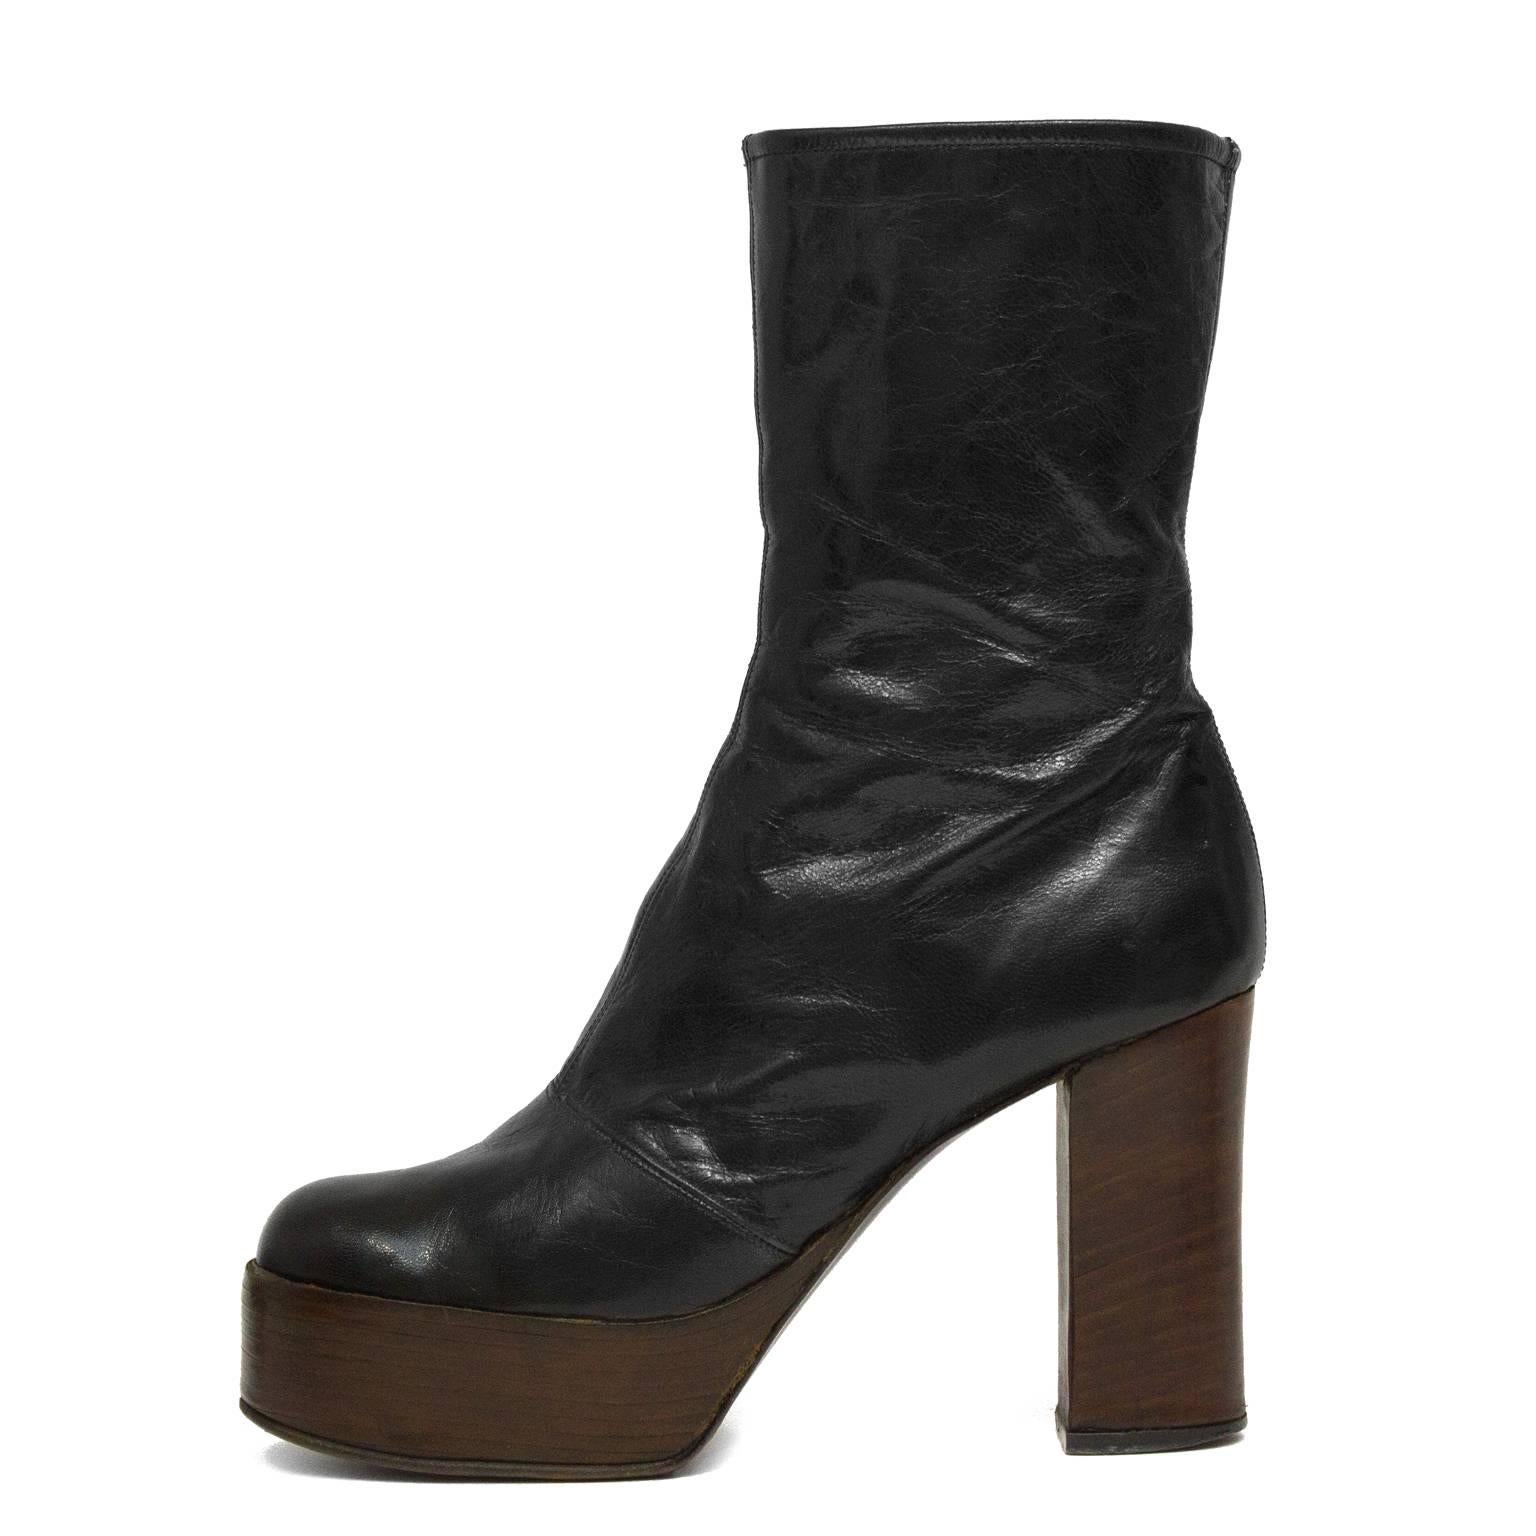 1970’s black leather platform boots from the Carnaby St. Beatles era. These boots sit mid calf height. Black leather body with an instep zipper closure and seaming down the front and across the bridge of the foot. Brown wood laminate stacked heel